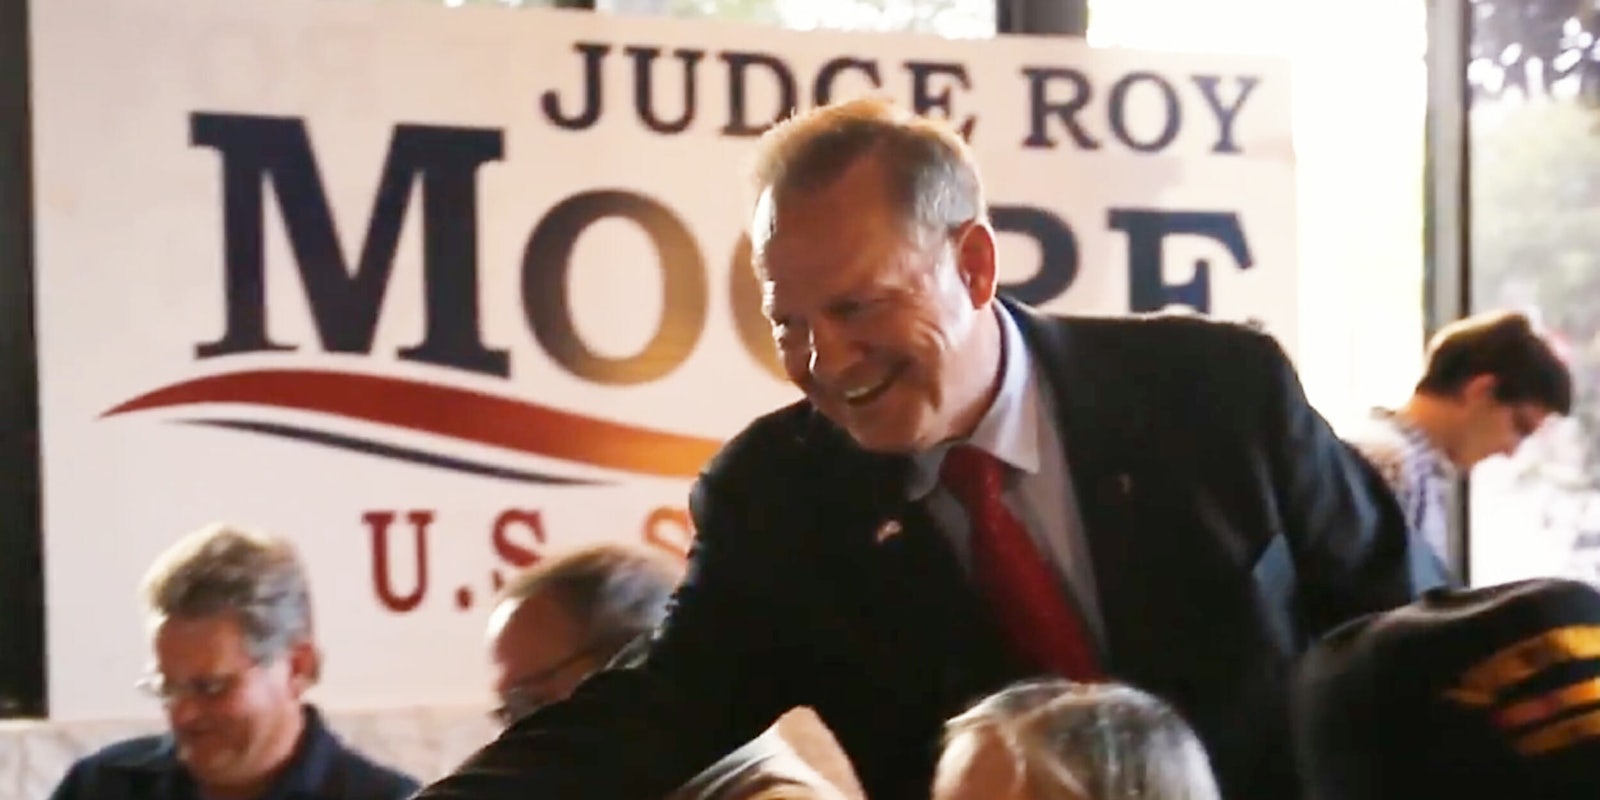 A woman has accused Roy Moore, the Republican Senate candidate in Alabama, of attempting rape her when she was 16.